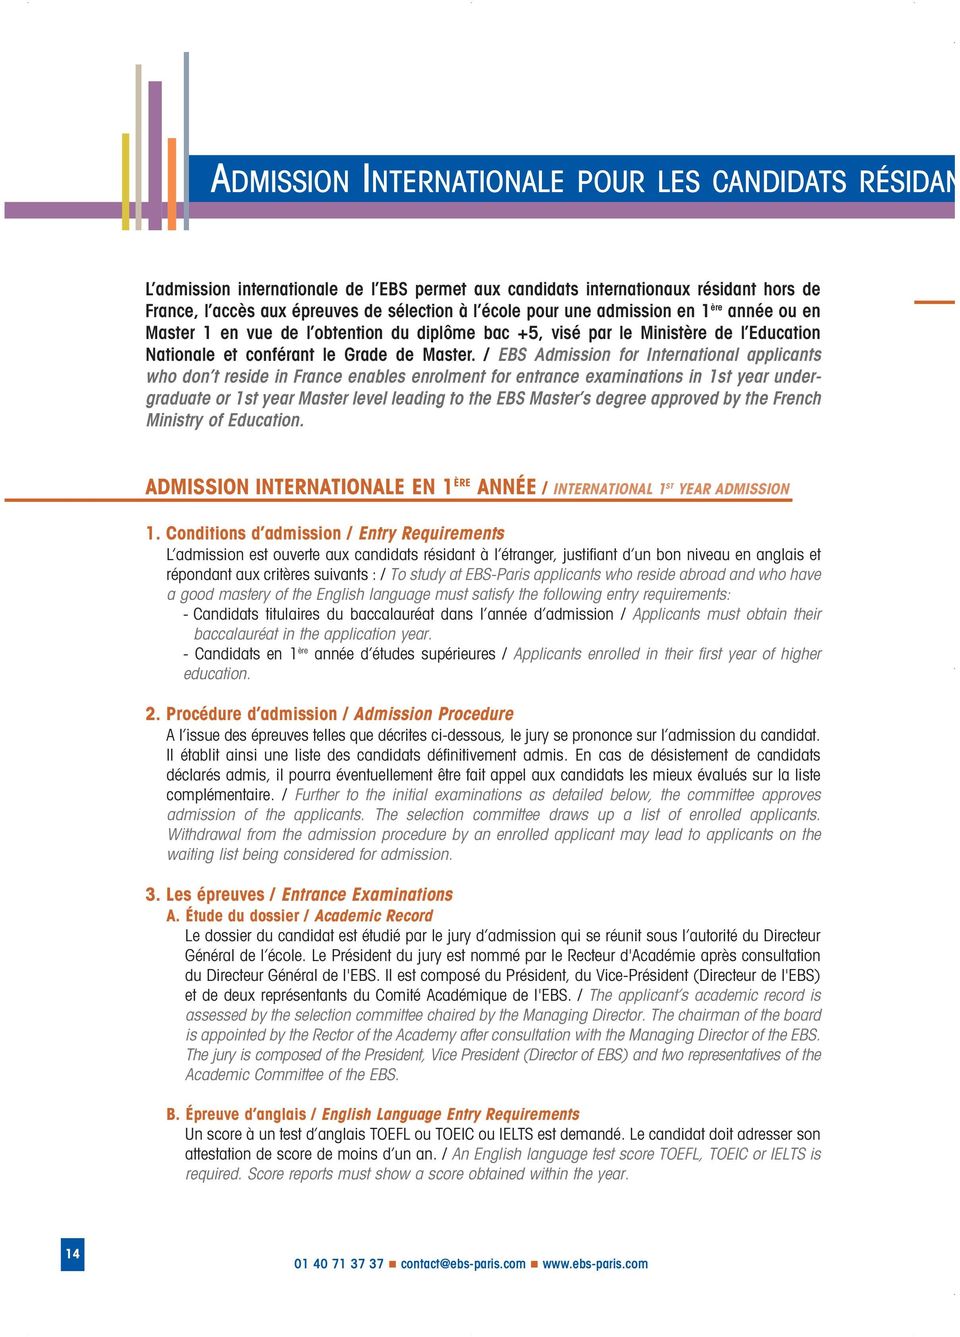 / EBS Admission for International applicants who don t reside in France enables enrolment for entrance examinations in 1st year undergraduate or 1st year Master level leading to the EBS Master s